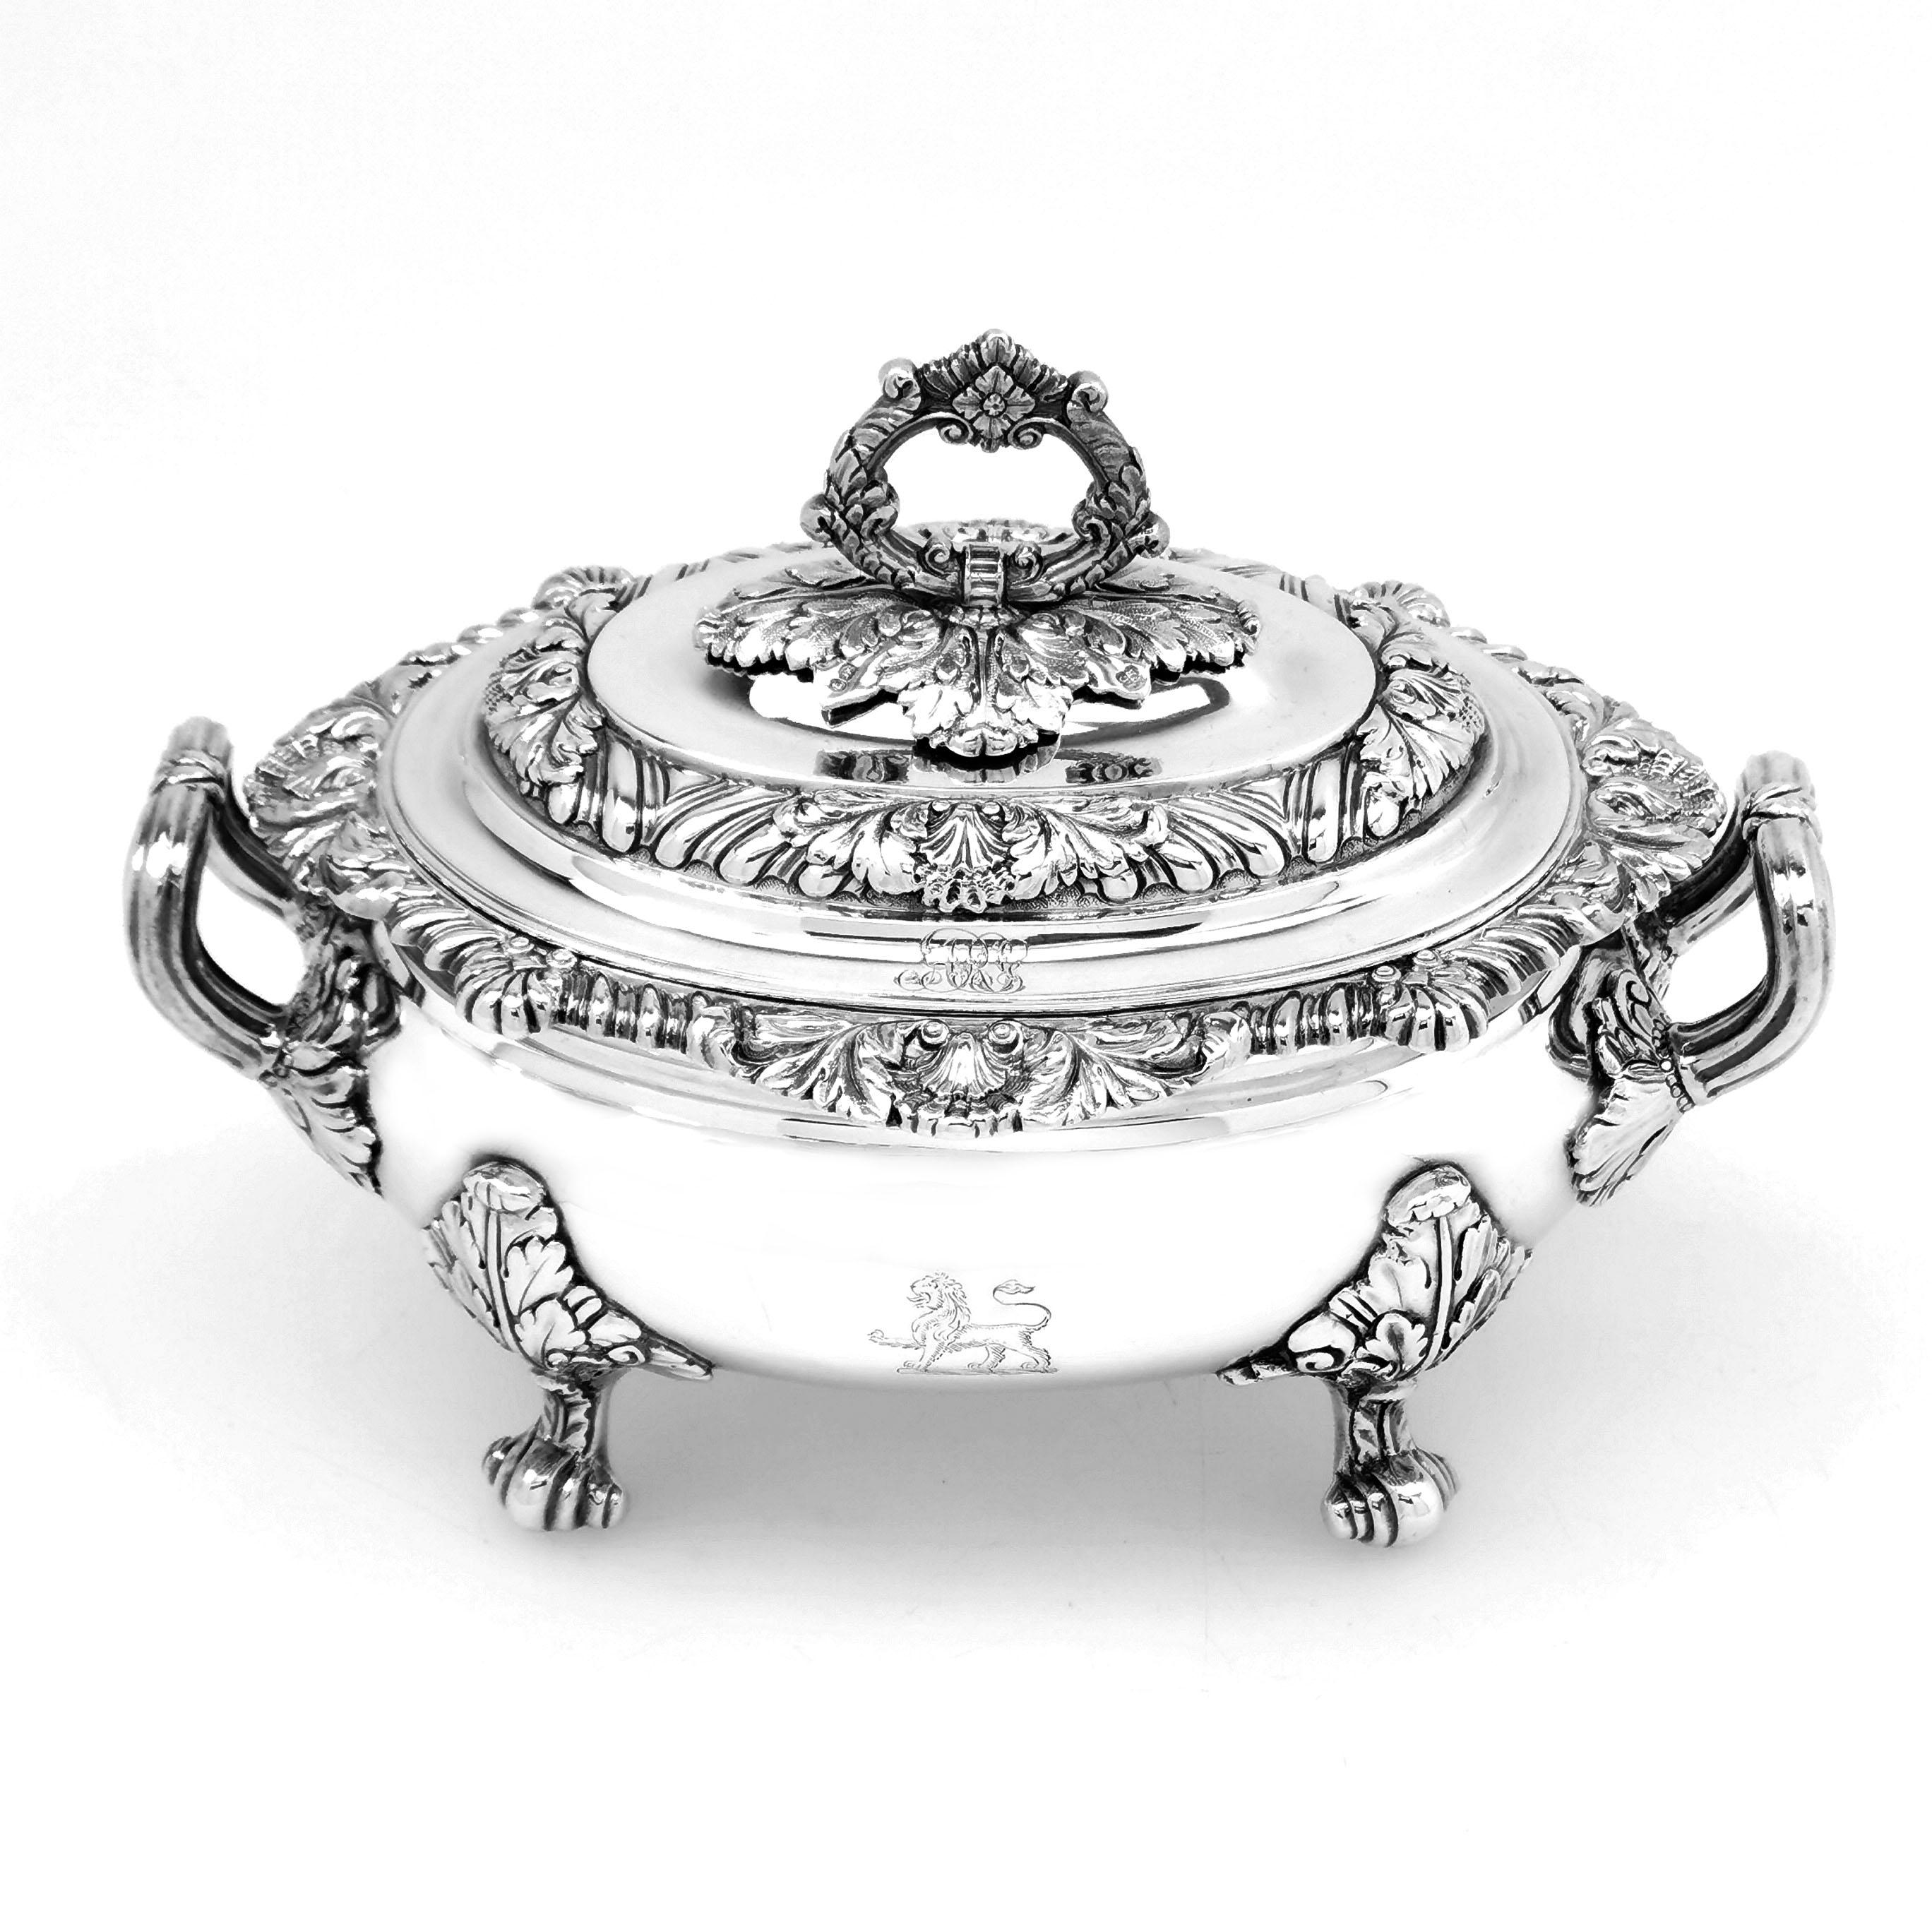 19th Century Pair of Antique Georgian Sterling Silver Sauce Tureens, 1821